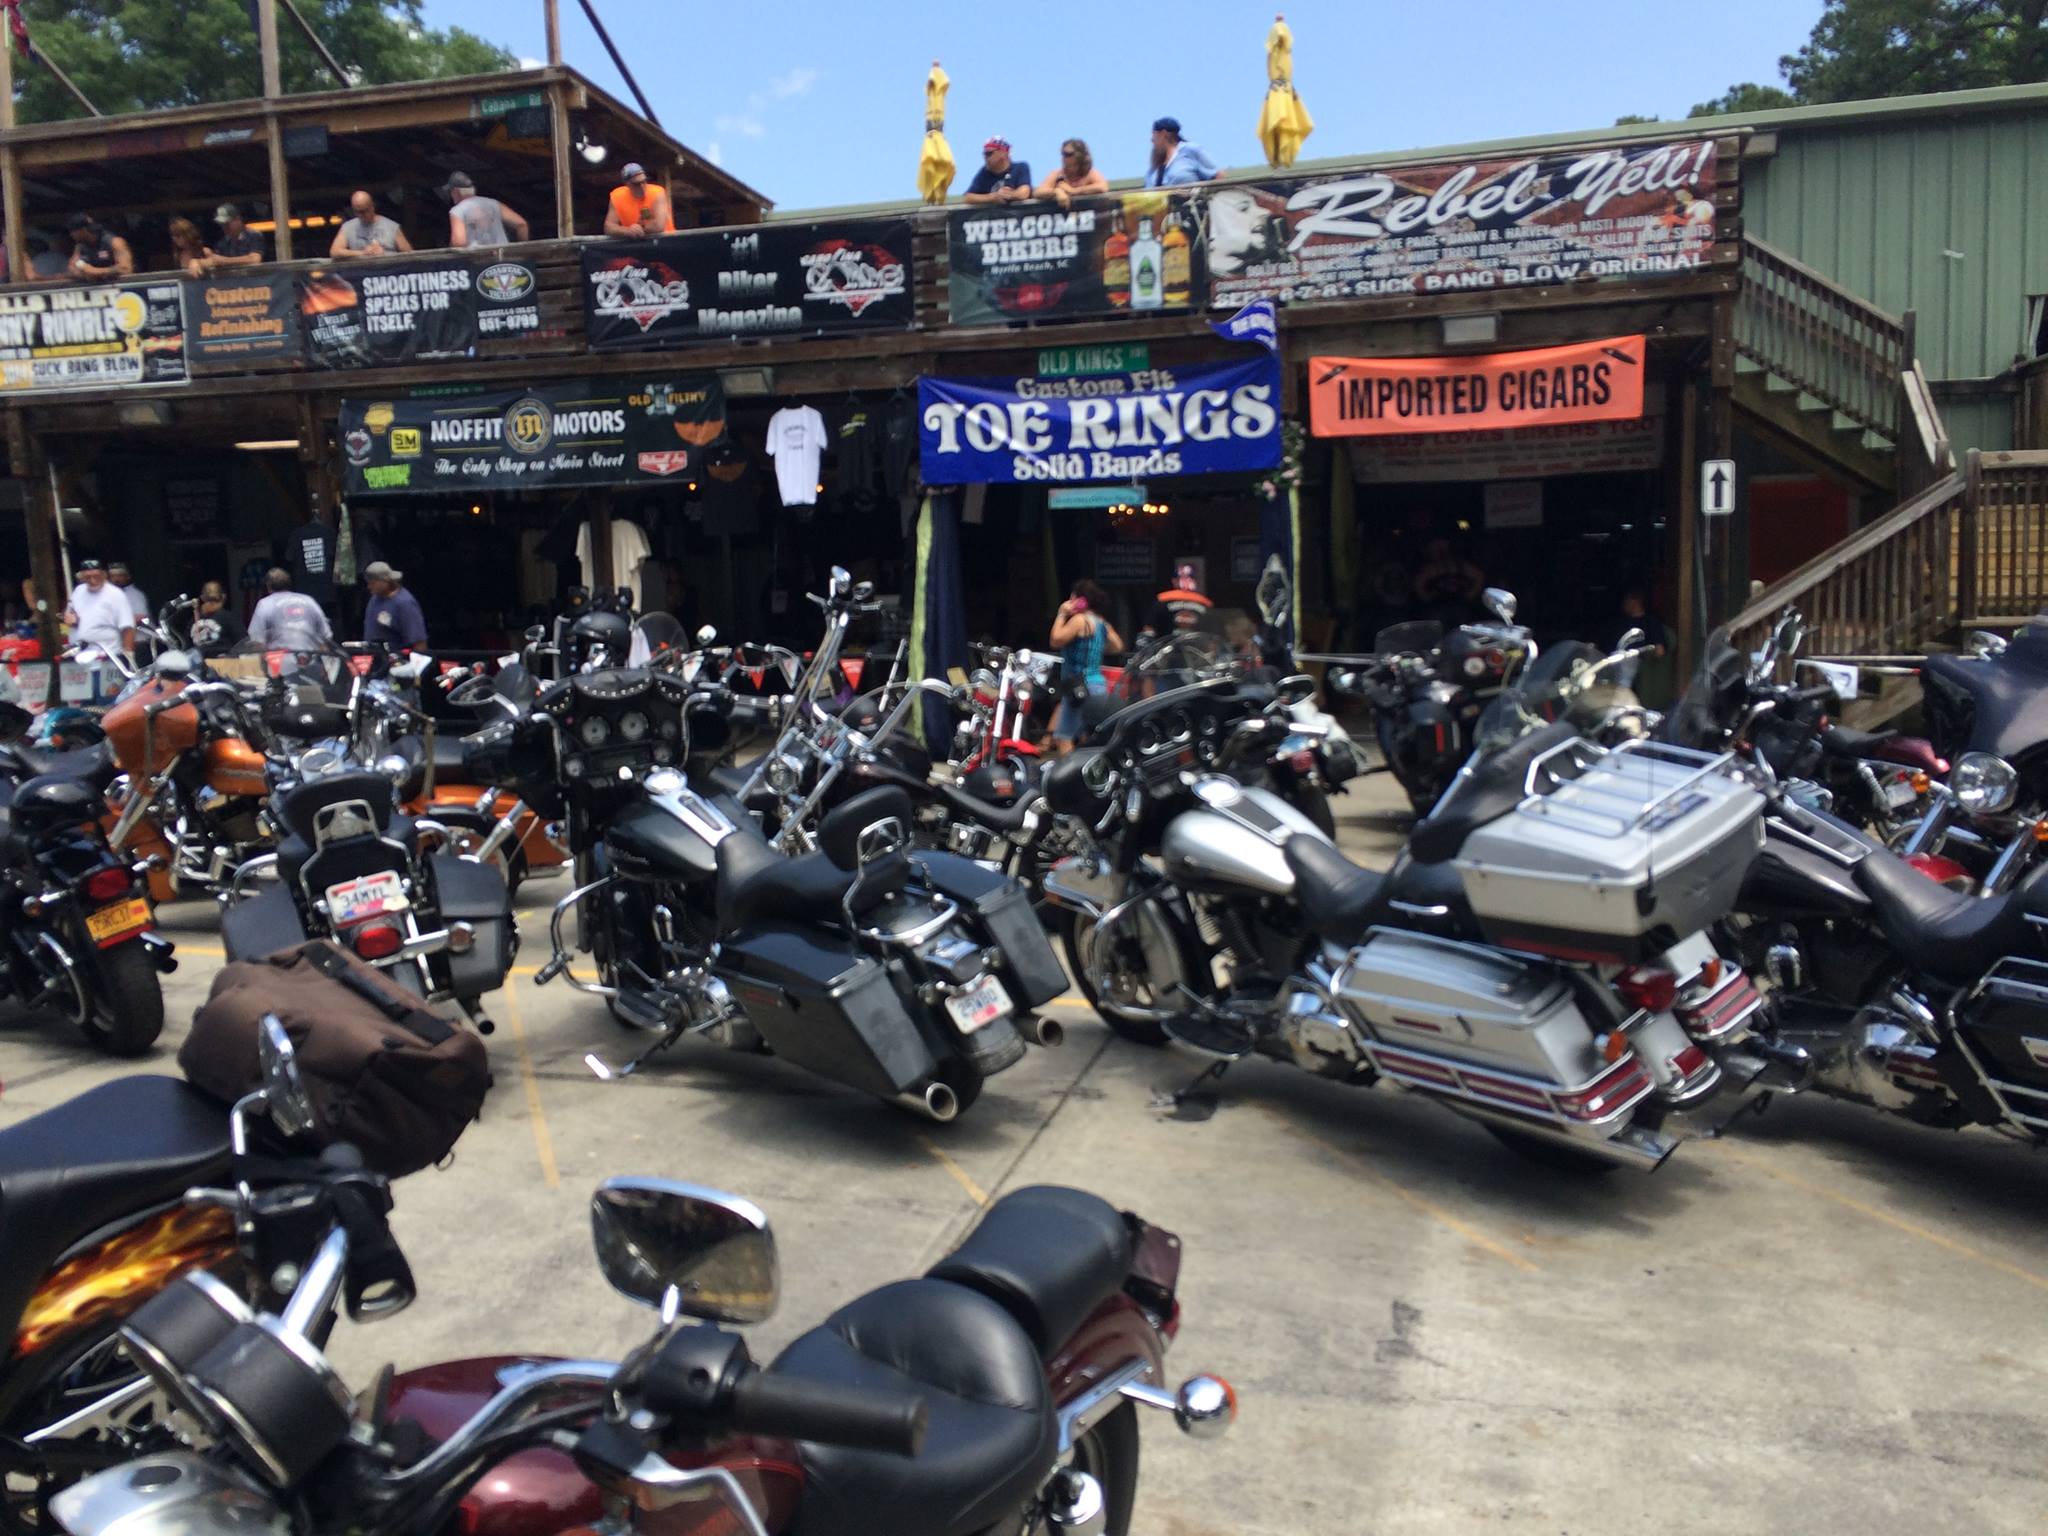 How has the pandemic changed Myrtle Beach's fall bike rally this year